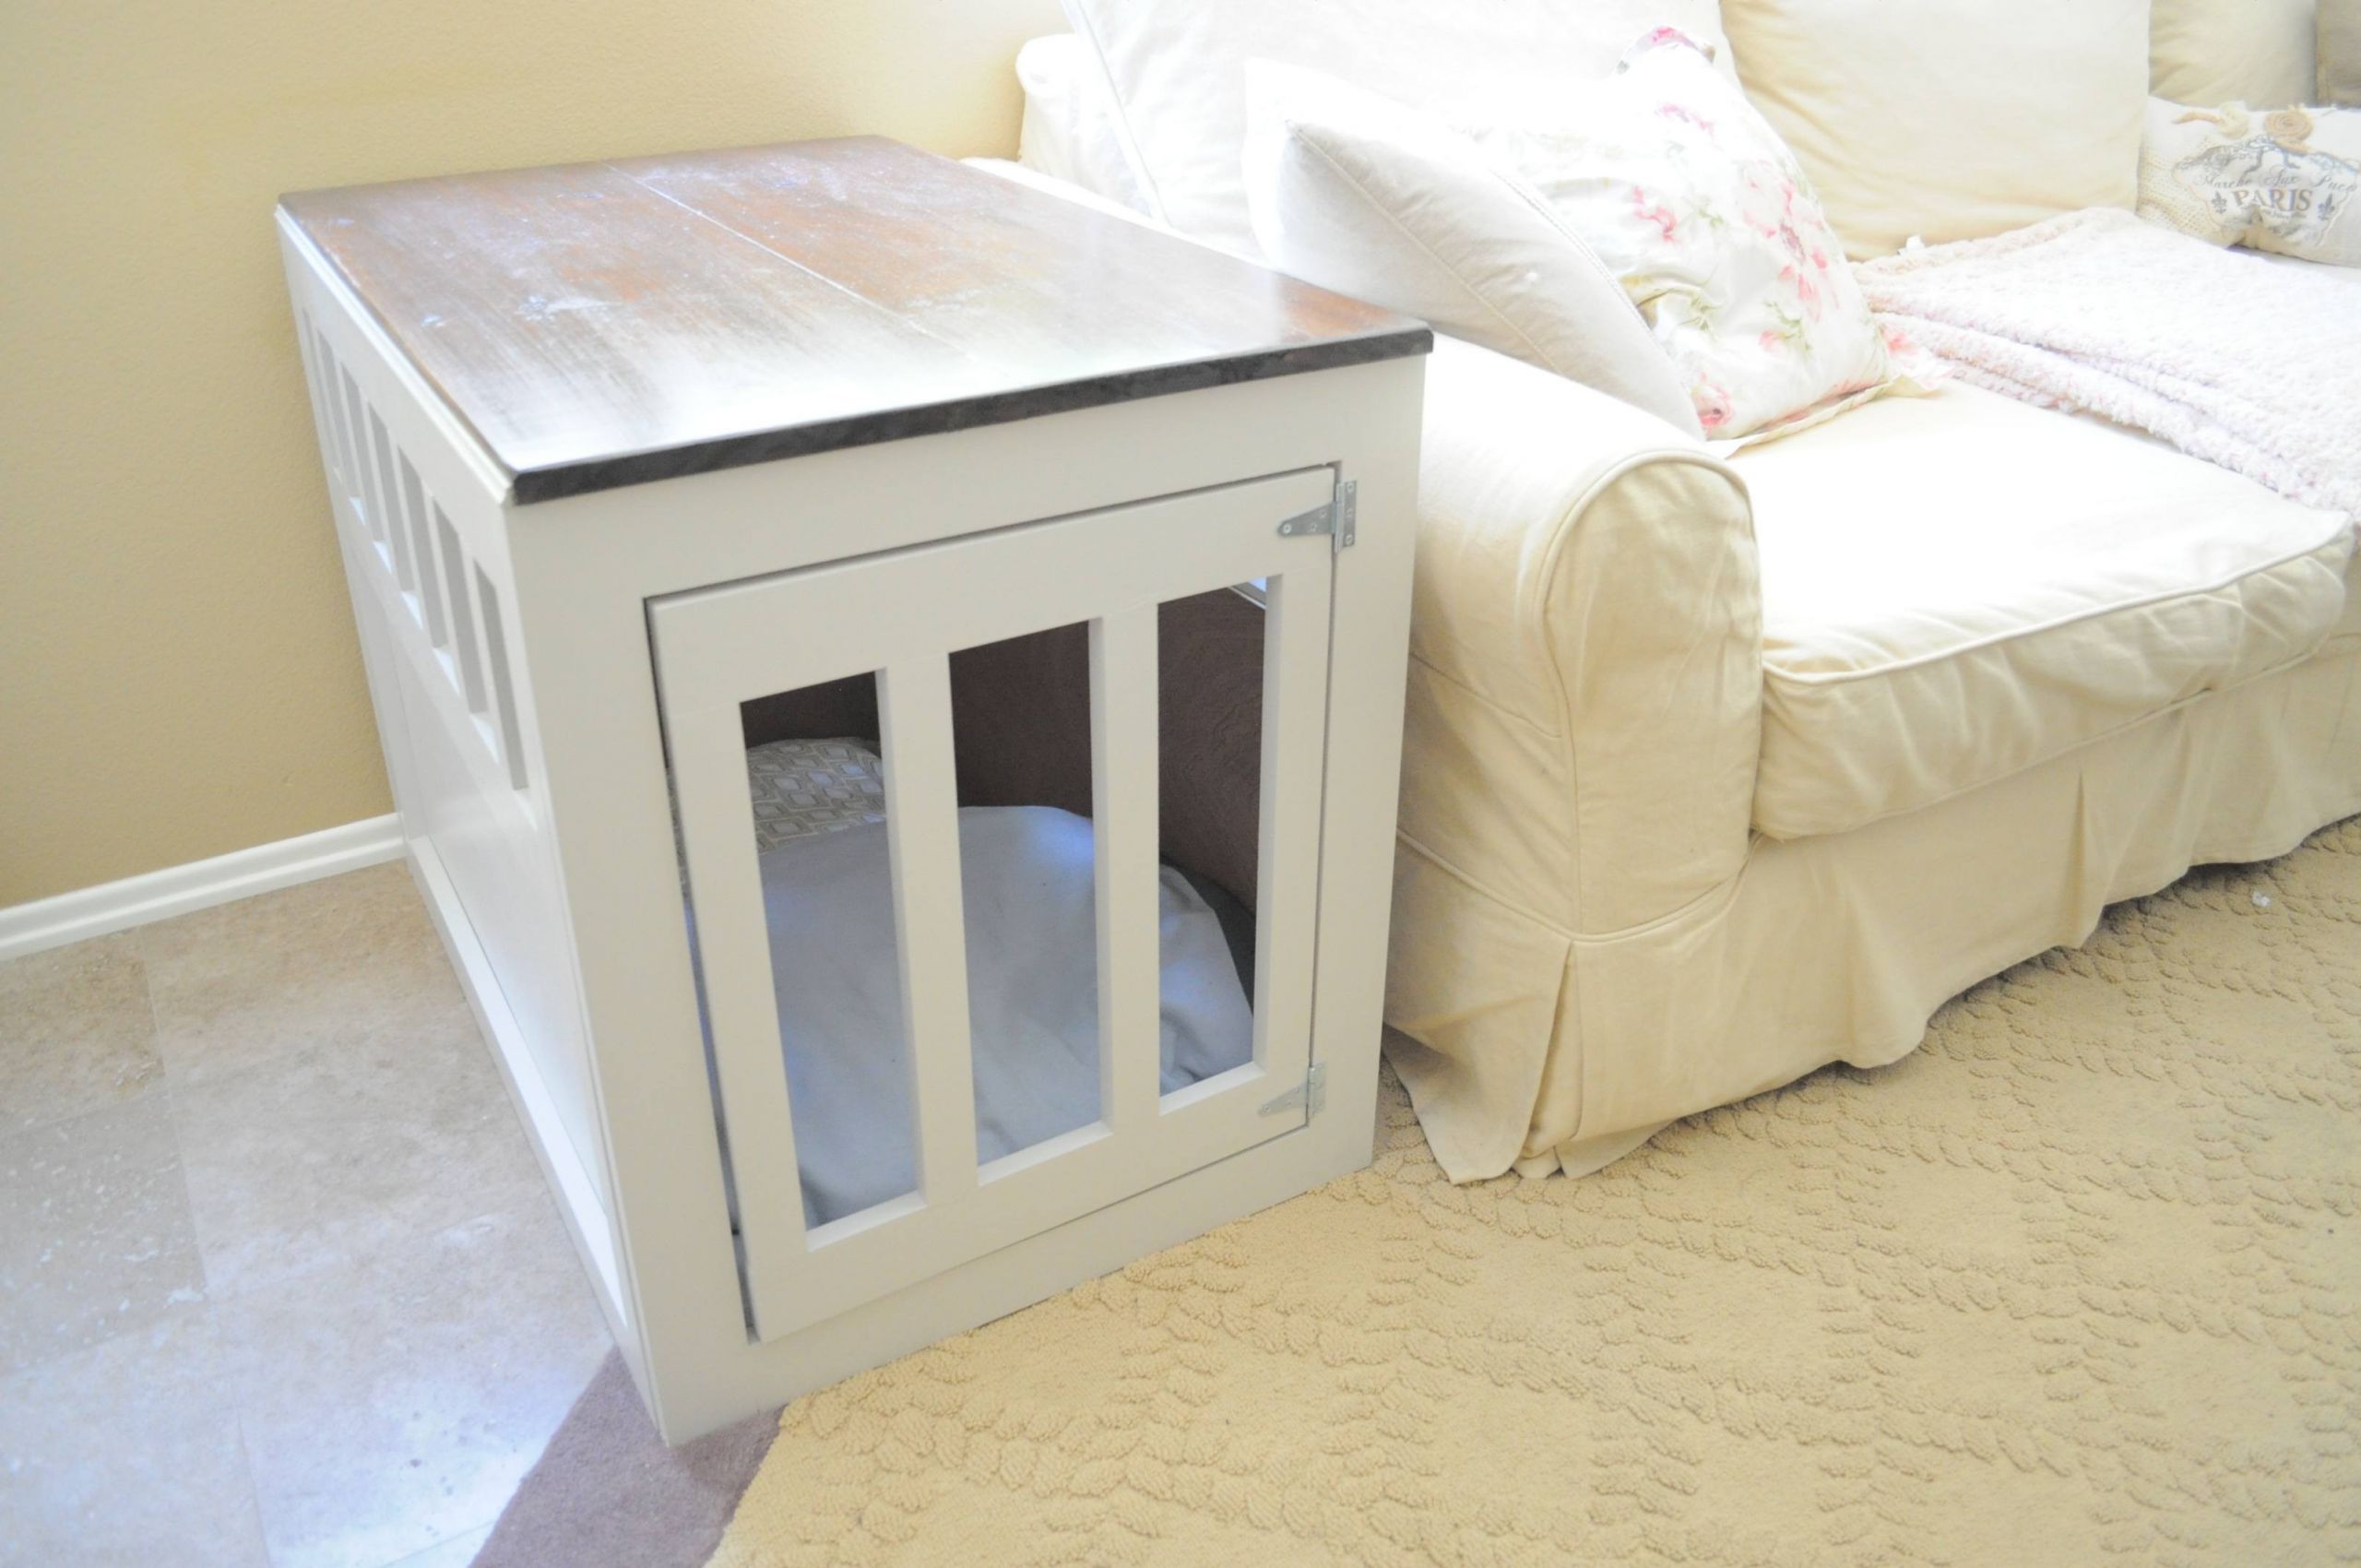 Dog Kennel Furniture DIY
 Every Dog Owner Should Learn These 20 DIY Pet Projects